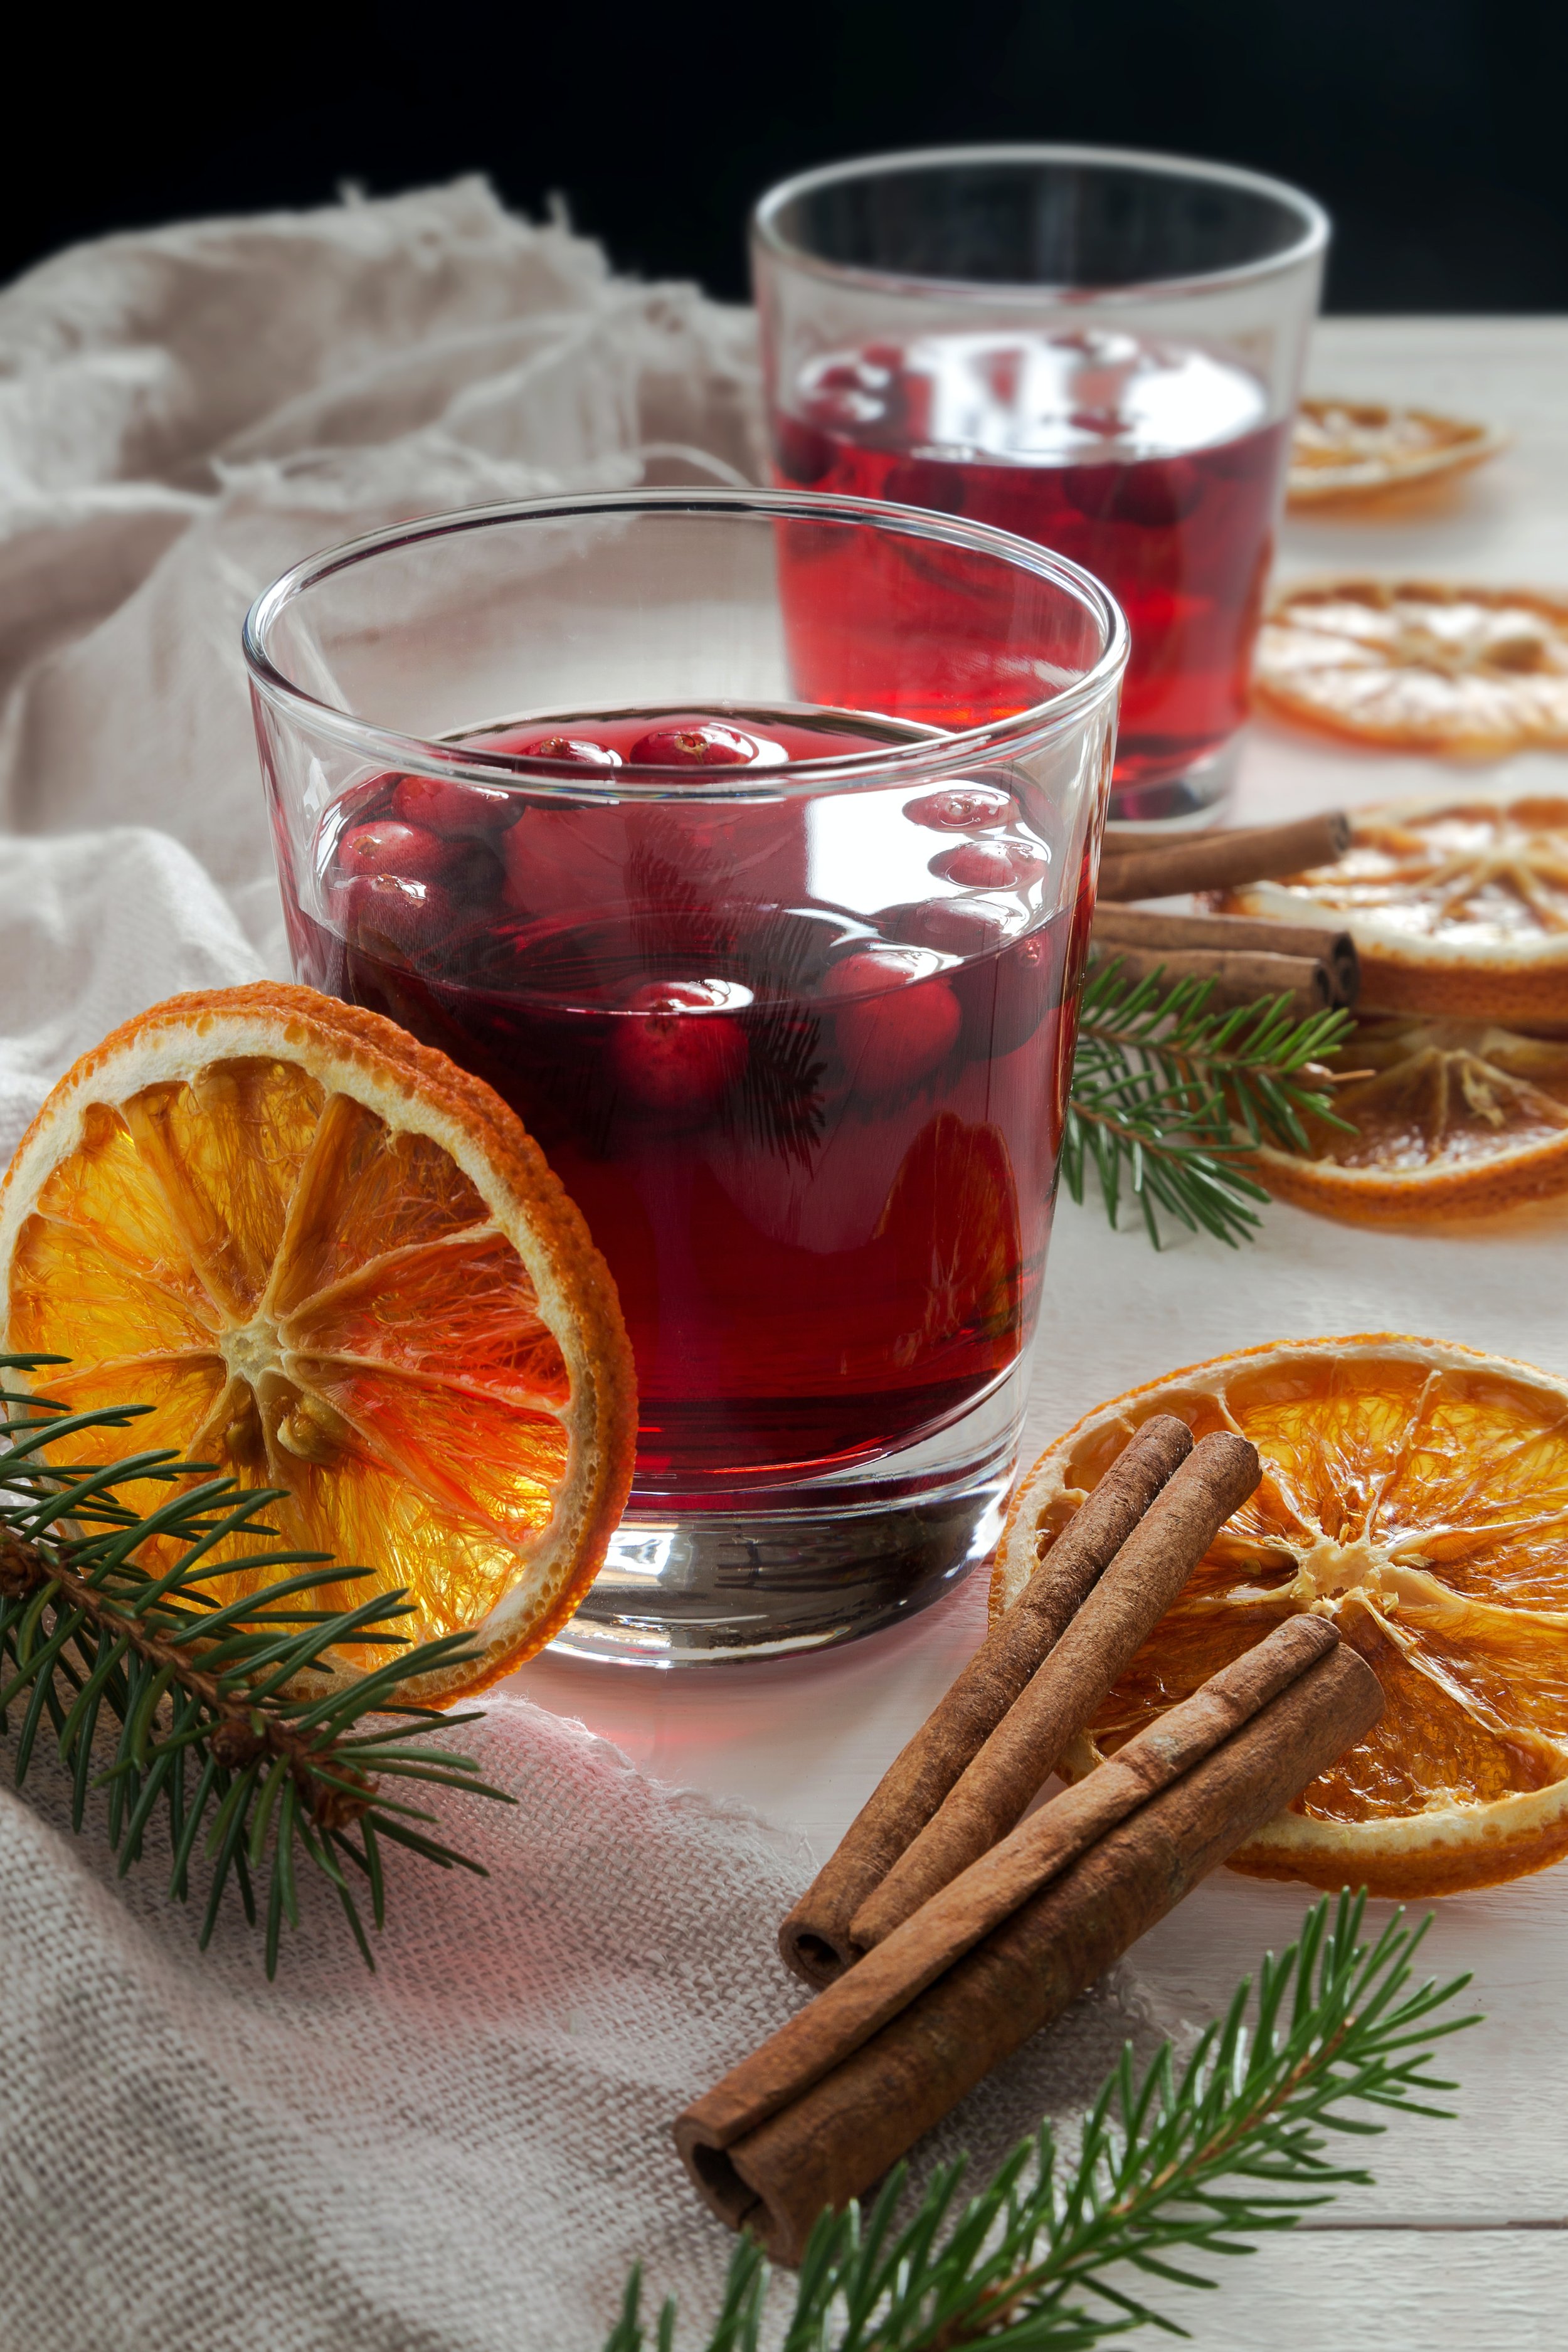 Hot spiced wine sets the mood